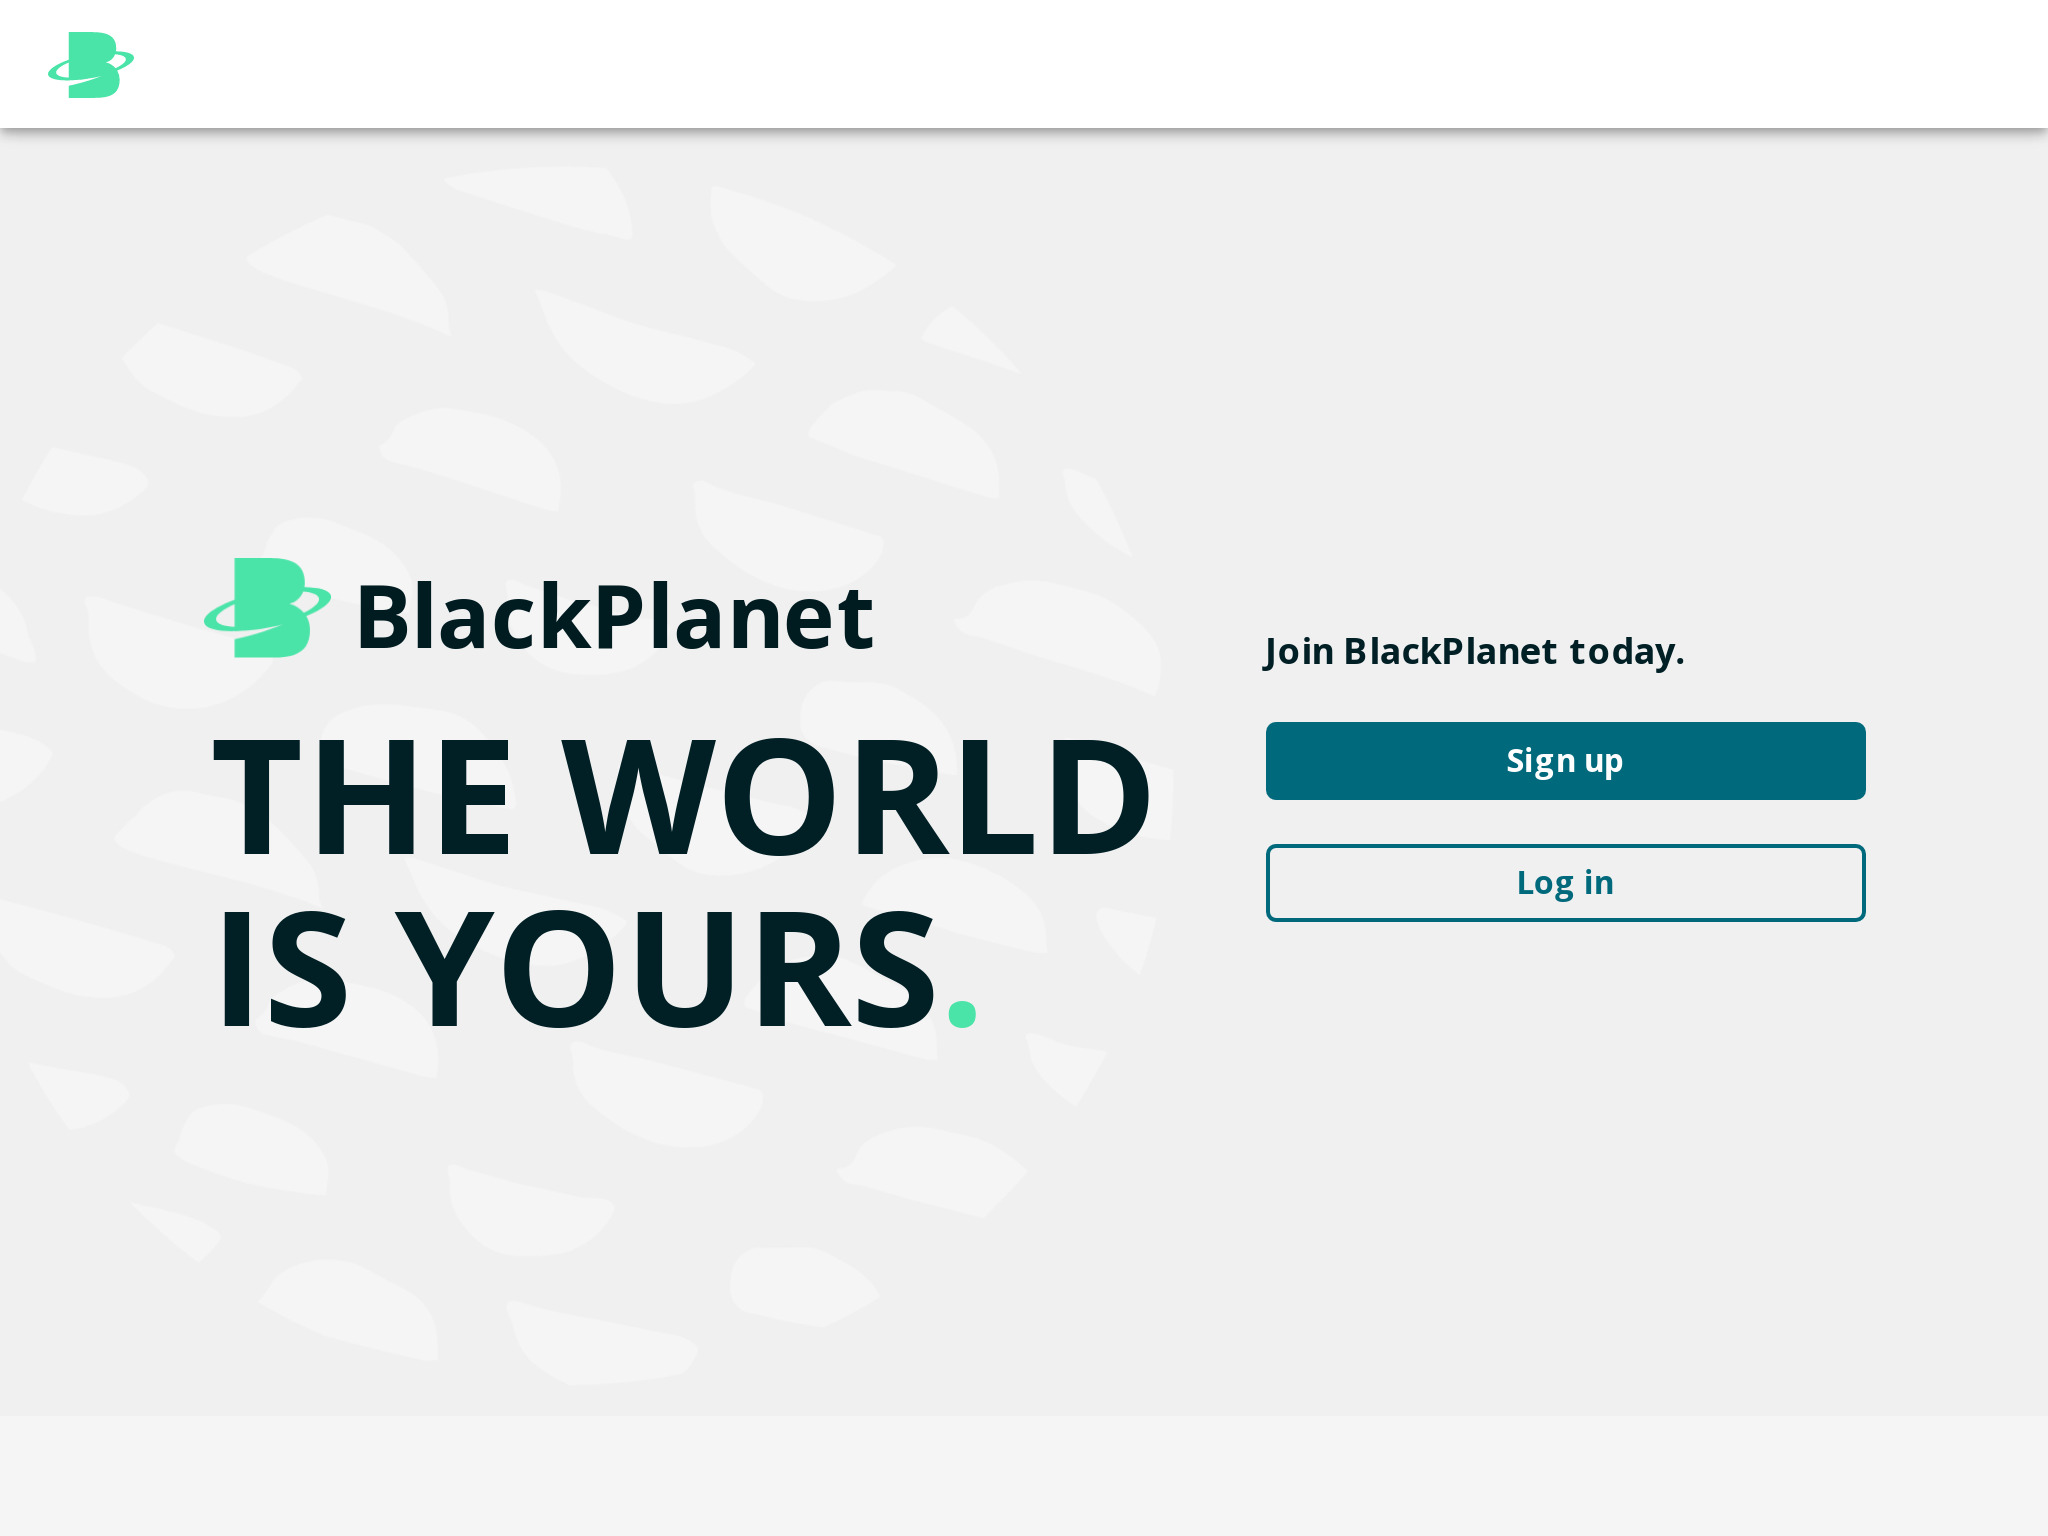 Blackplanet Review in 2023 – Is It Worth It?